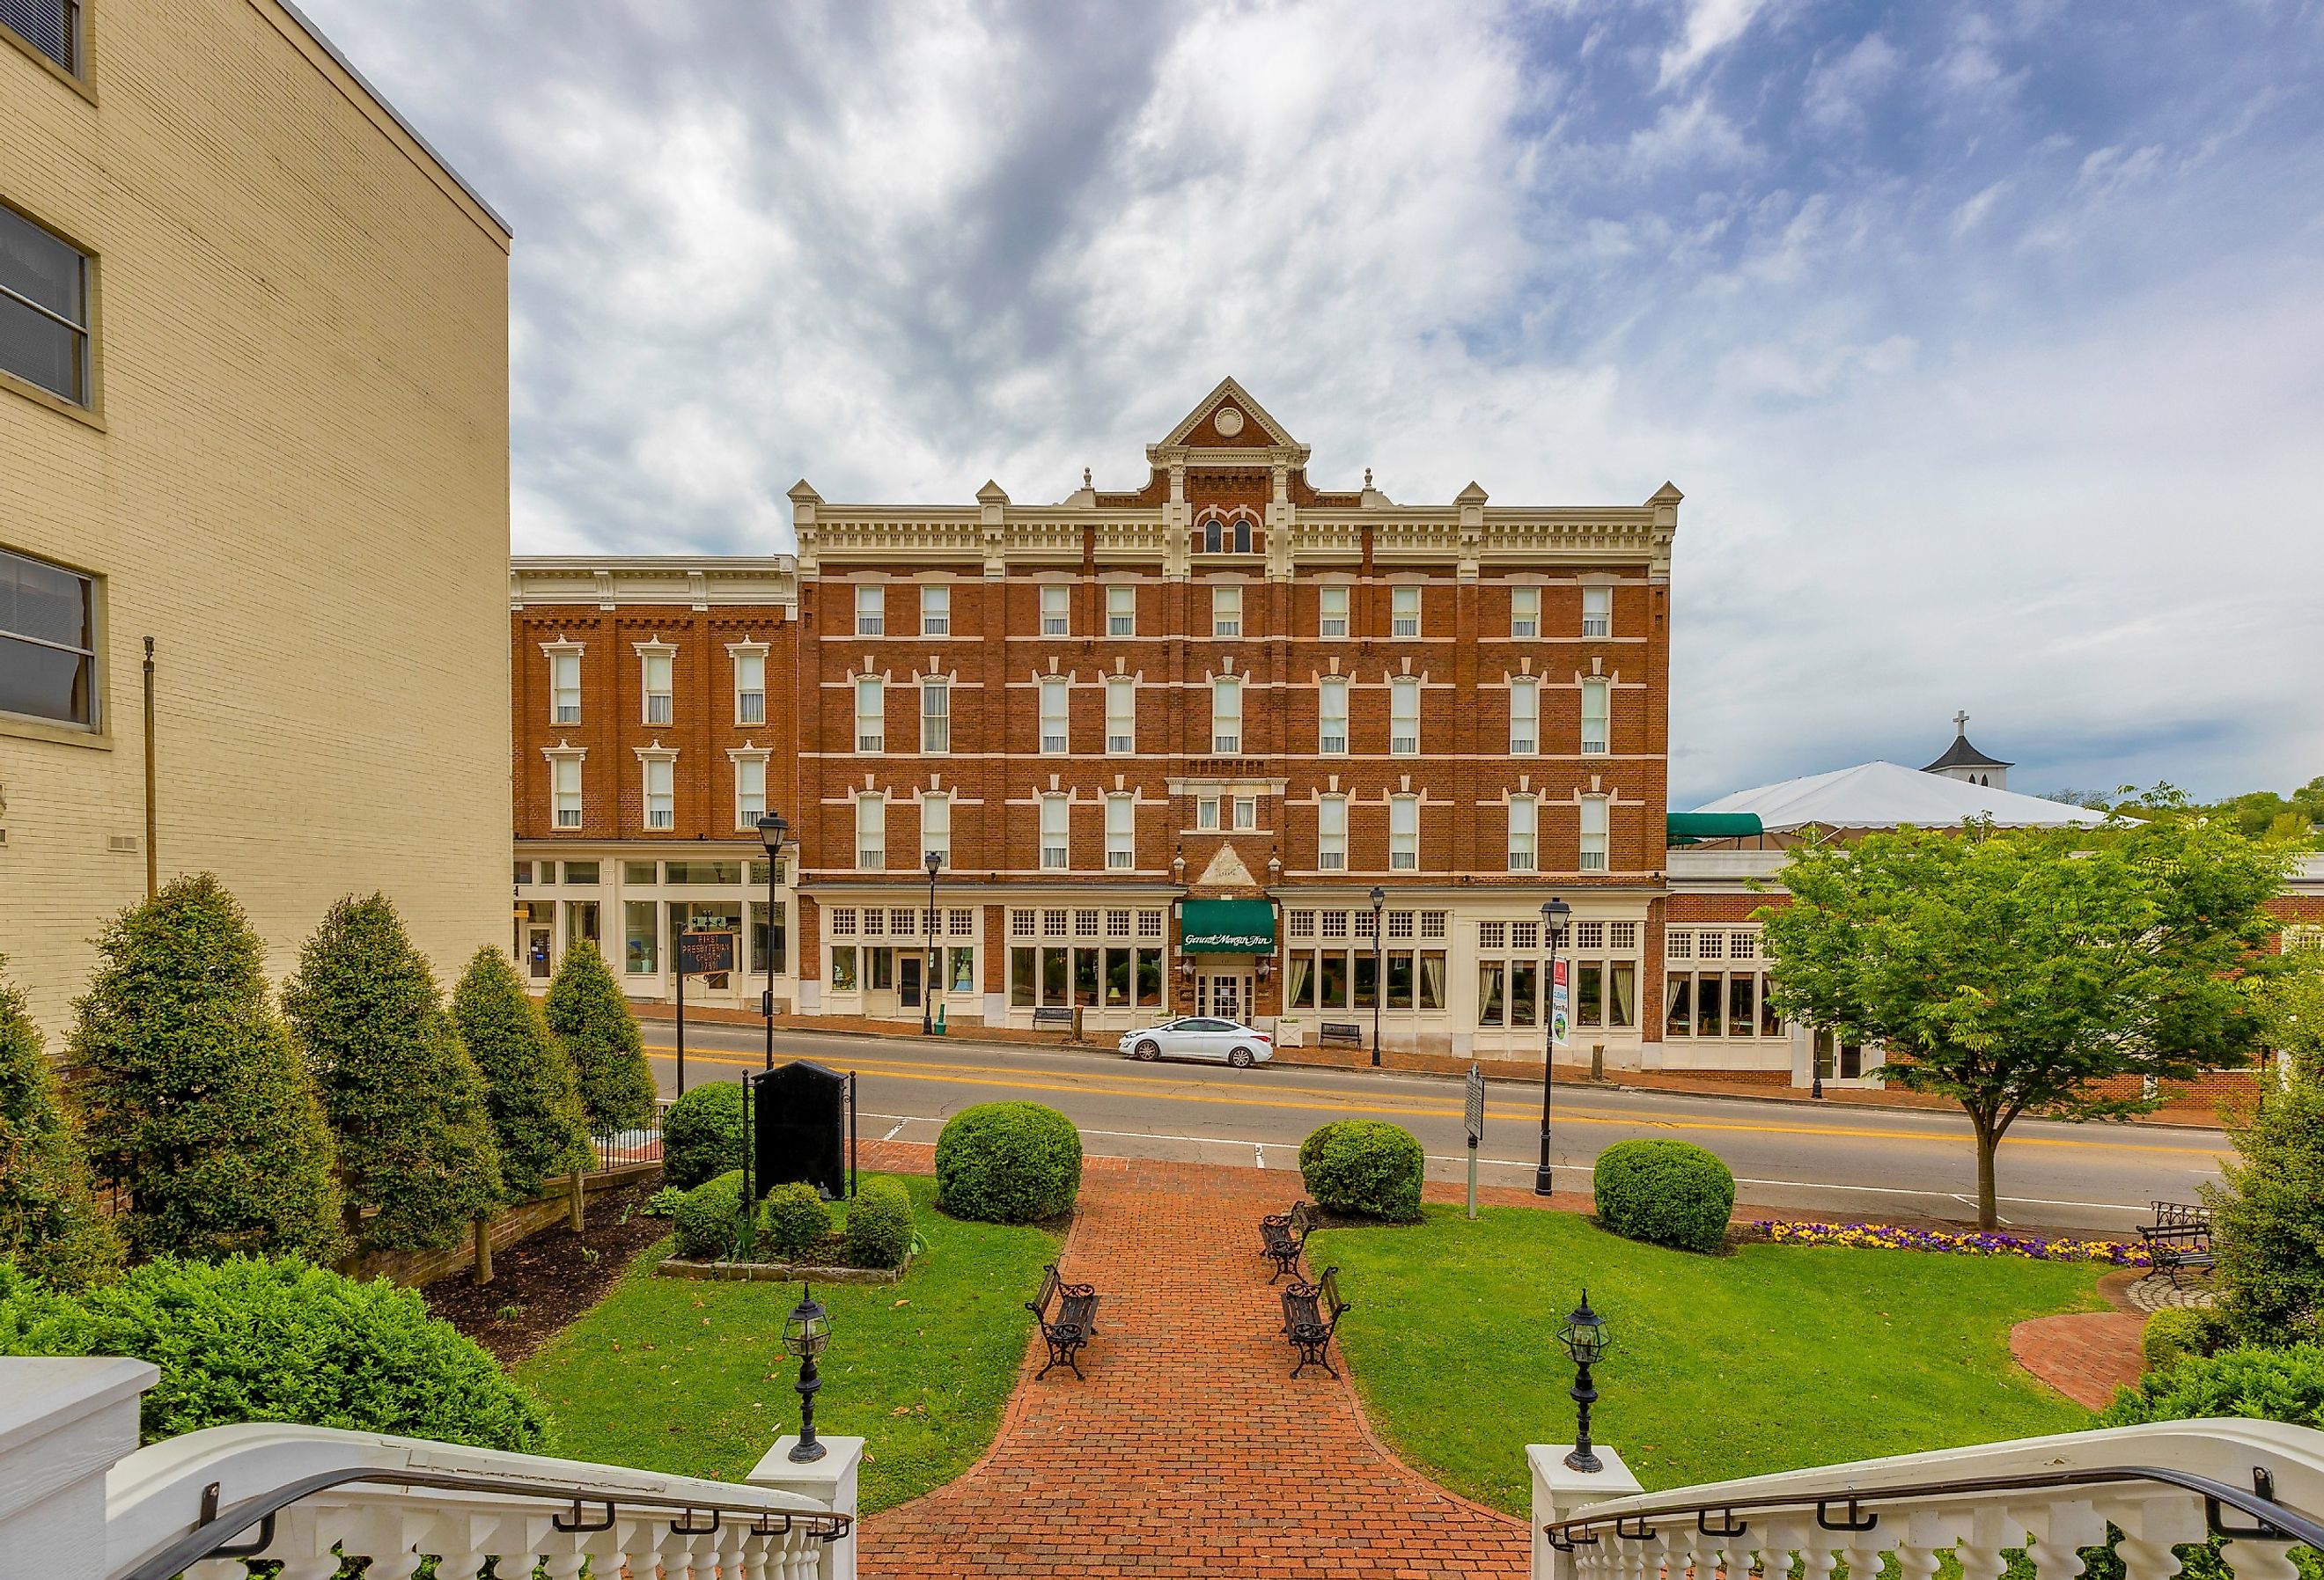 Historic district of Greeneville, Tennessee. Image credit Dee Browning via Shutterstock.com